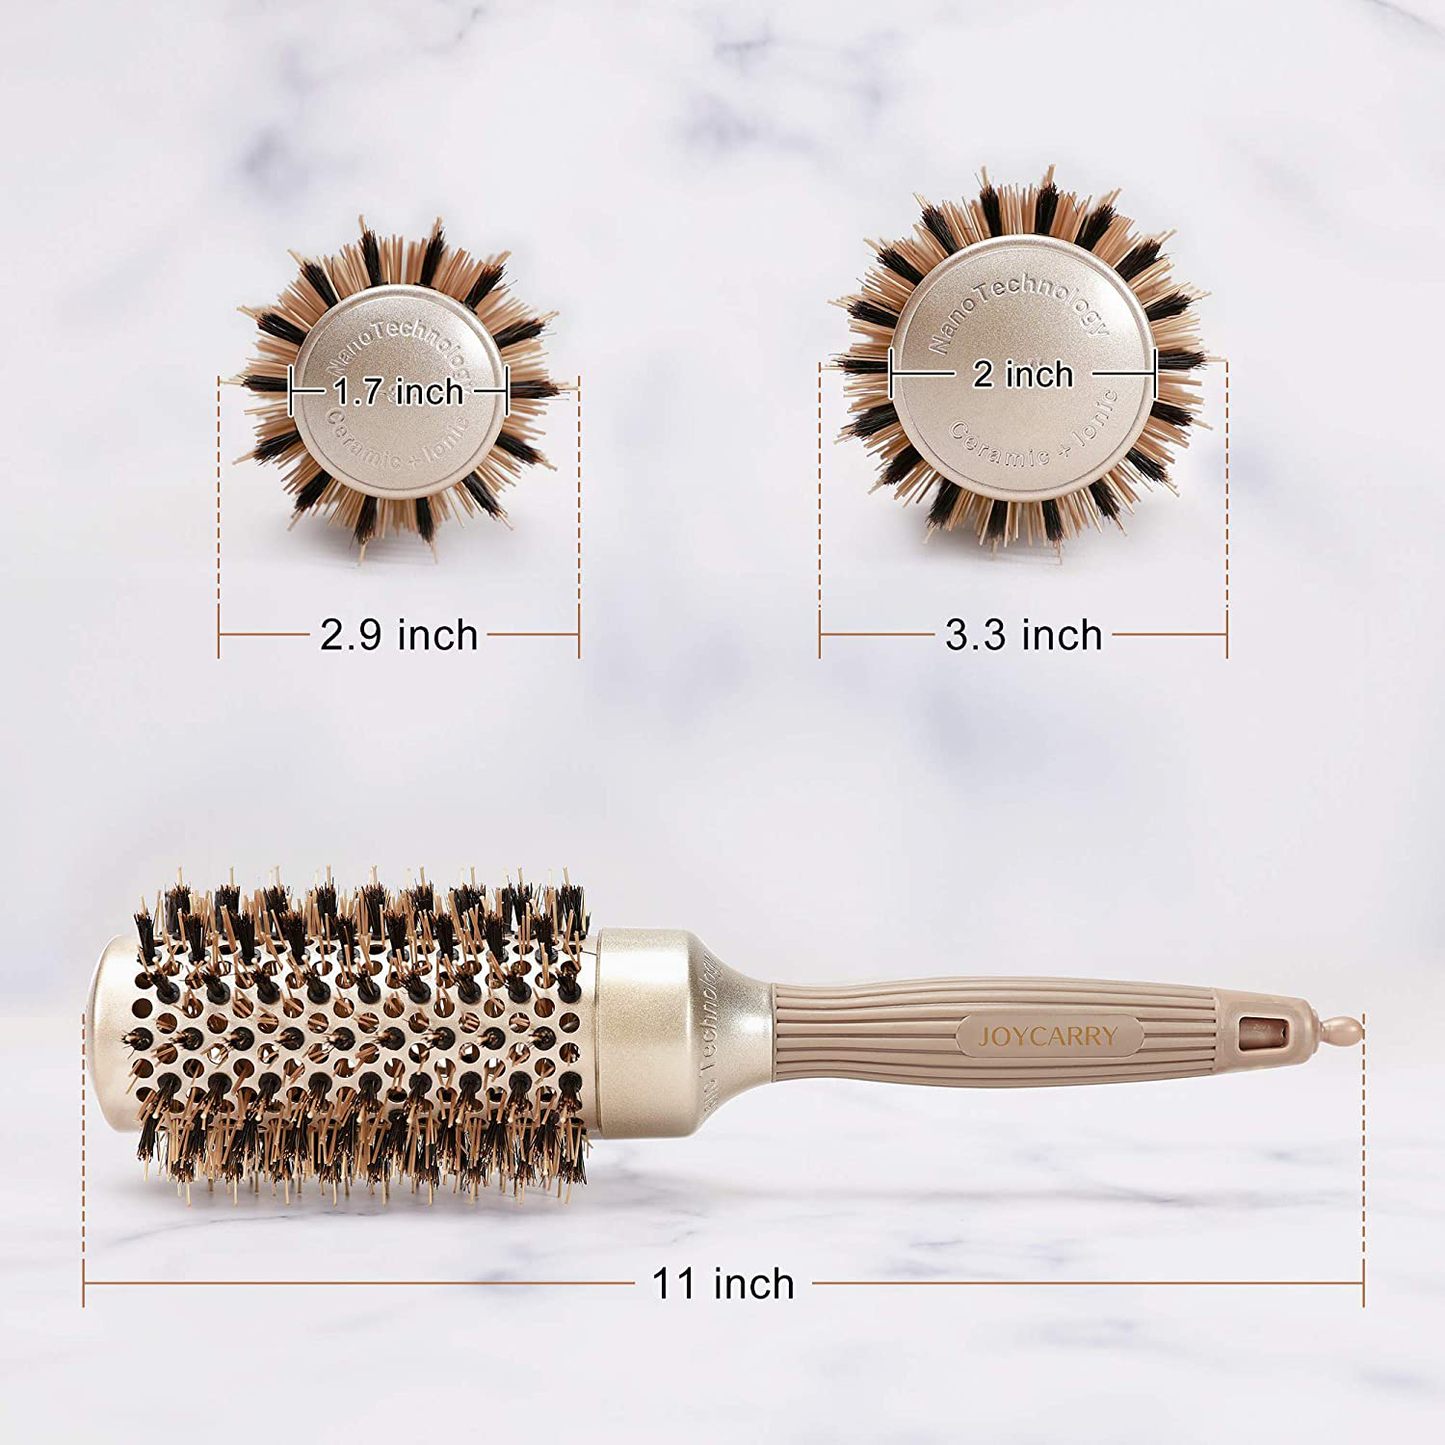 Joycarry Medium round Brush for Women Blow Drying(1.7”), Nano Thermal Ceramic & Ionic Tech round Brush for Shiny Hair, Boar Bristles Vent Roller Brush for Salon-Like Blowout Volume, Styling, Curling